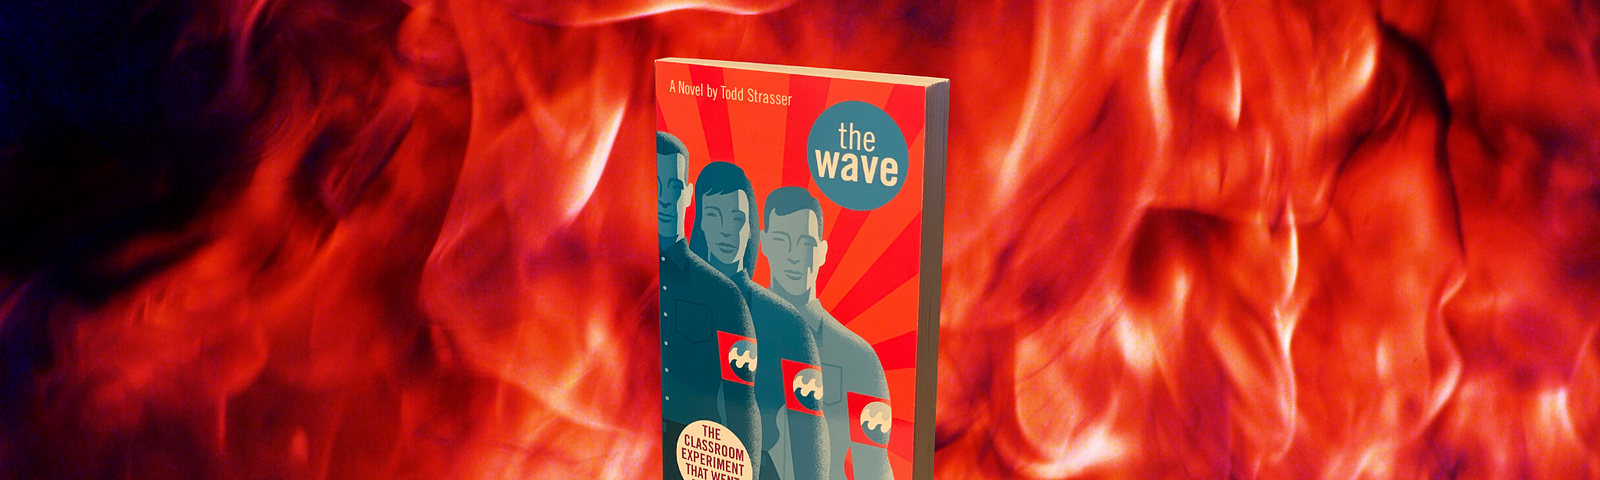 Book Review 02/2021 The Wave How a group of people falls prey to fascism